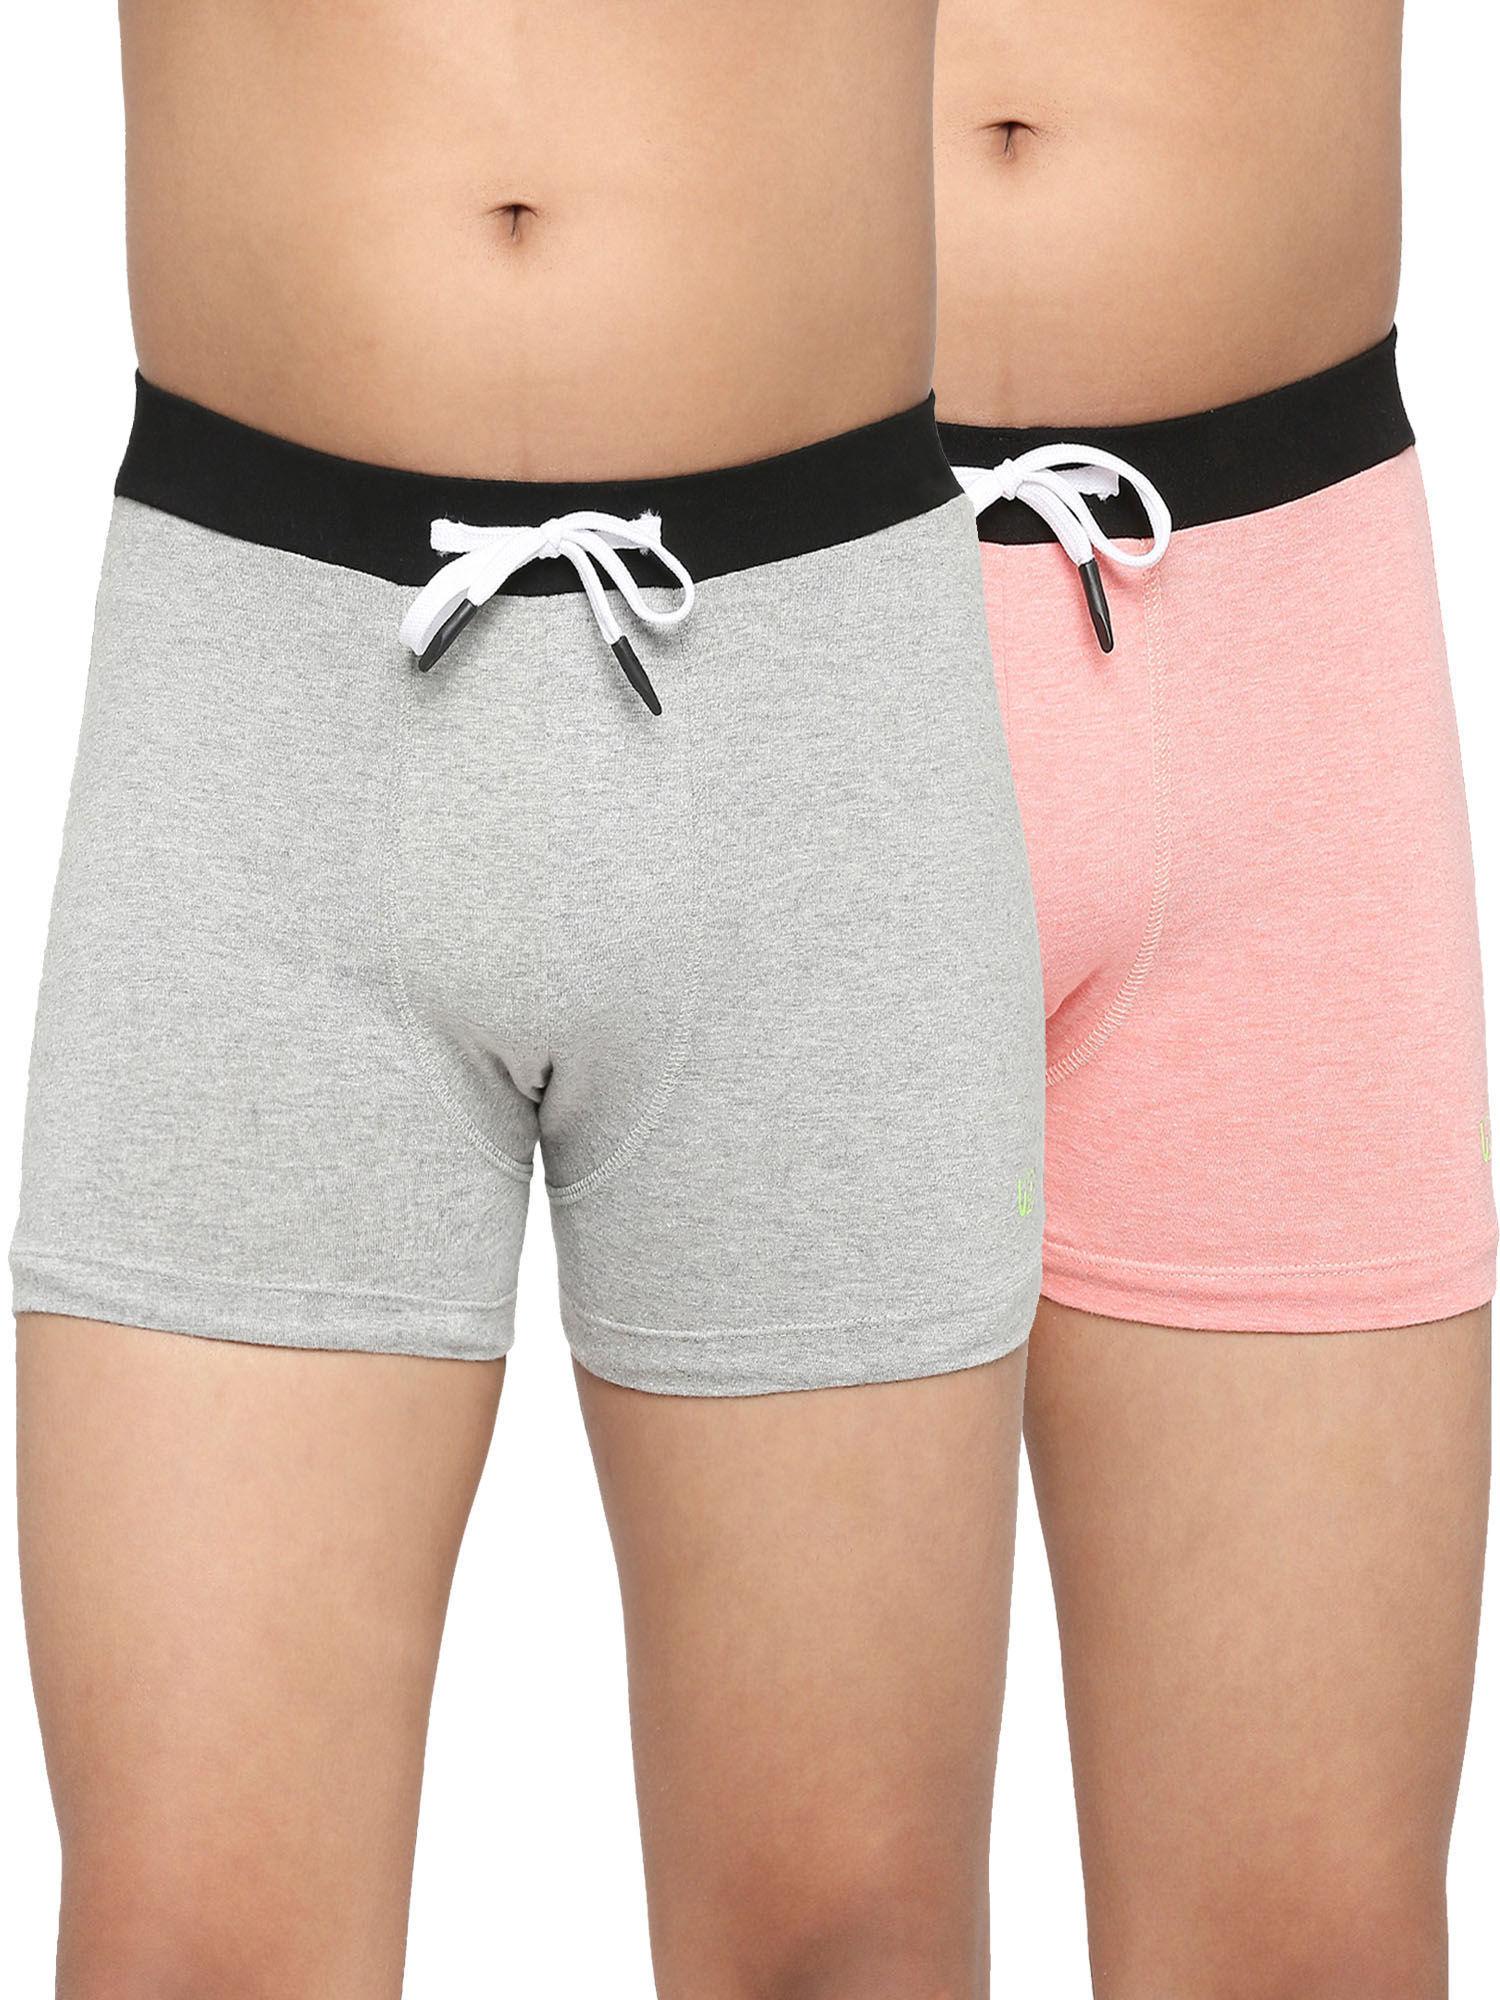 teenagers cotton trunk light grey and pink (pack of 2)